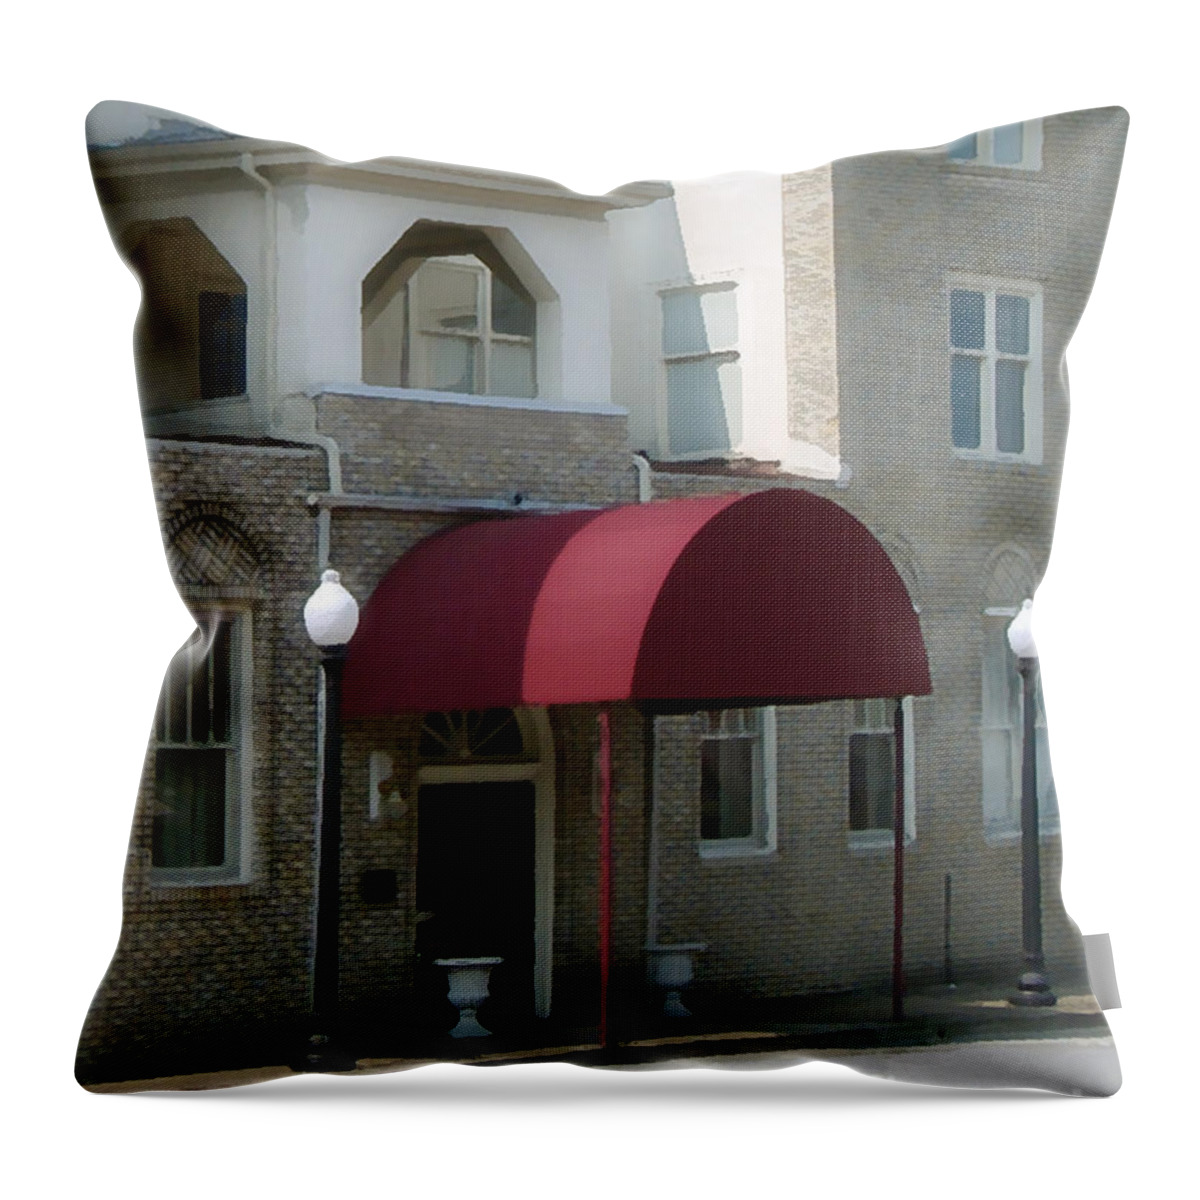 Hotel Throw Pillow featuring the photograph The Greystone Hotel by Lee Owenby